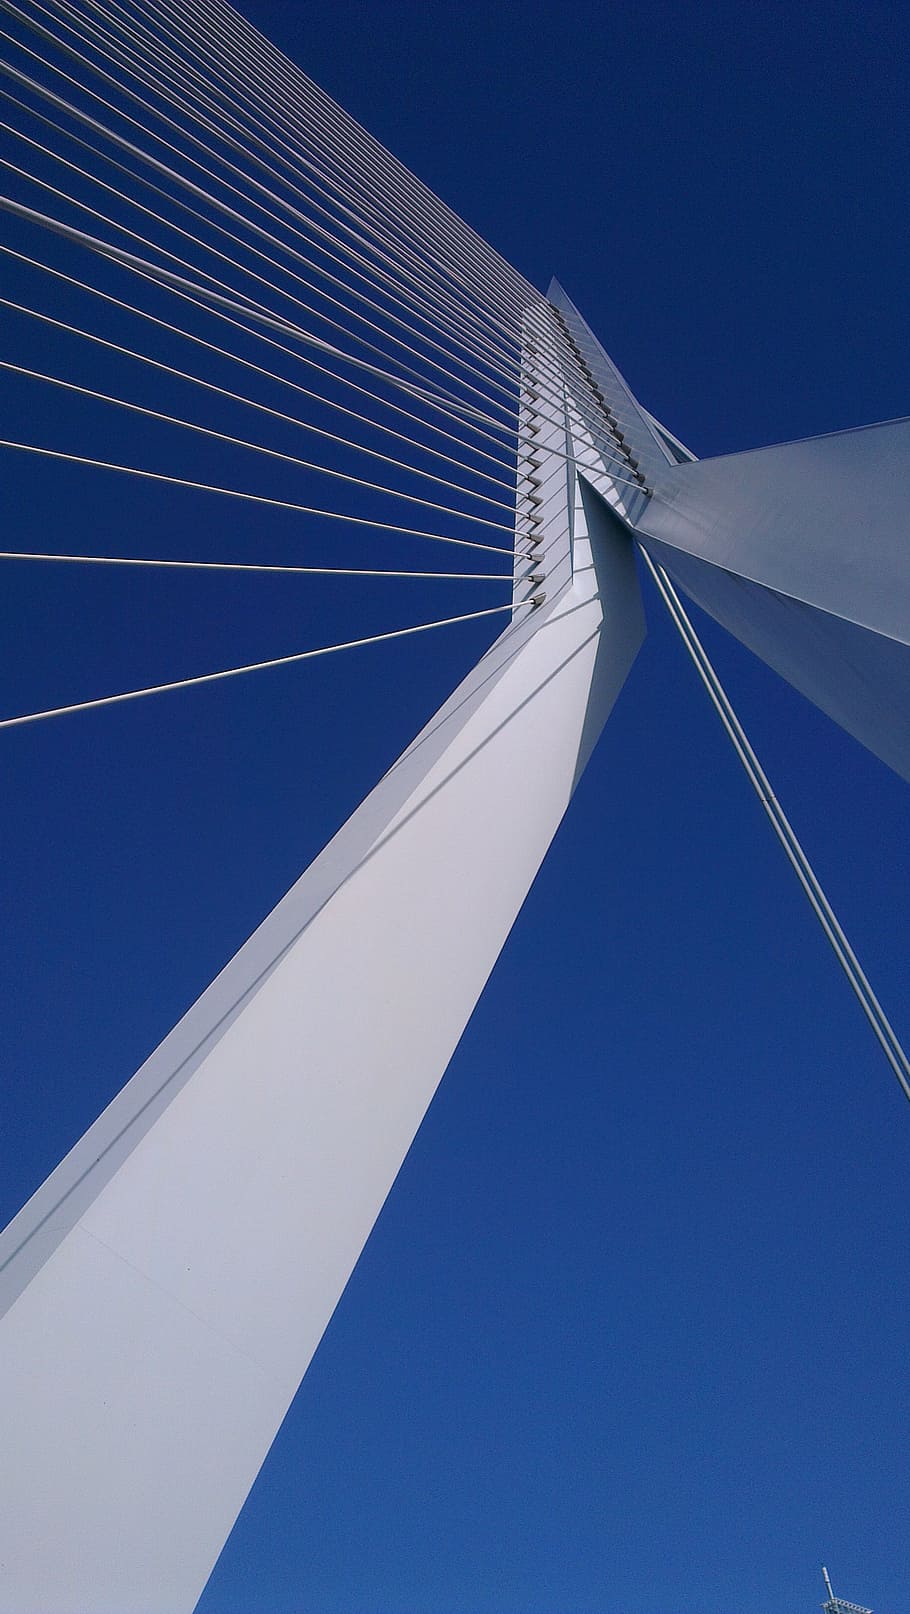 rotterdam, swan, erasmus bridge, air, sky, blue, low angle view, architecture, built structure, clear sky